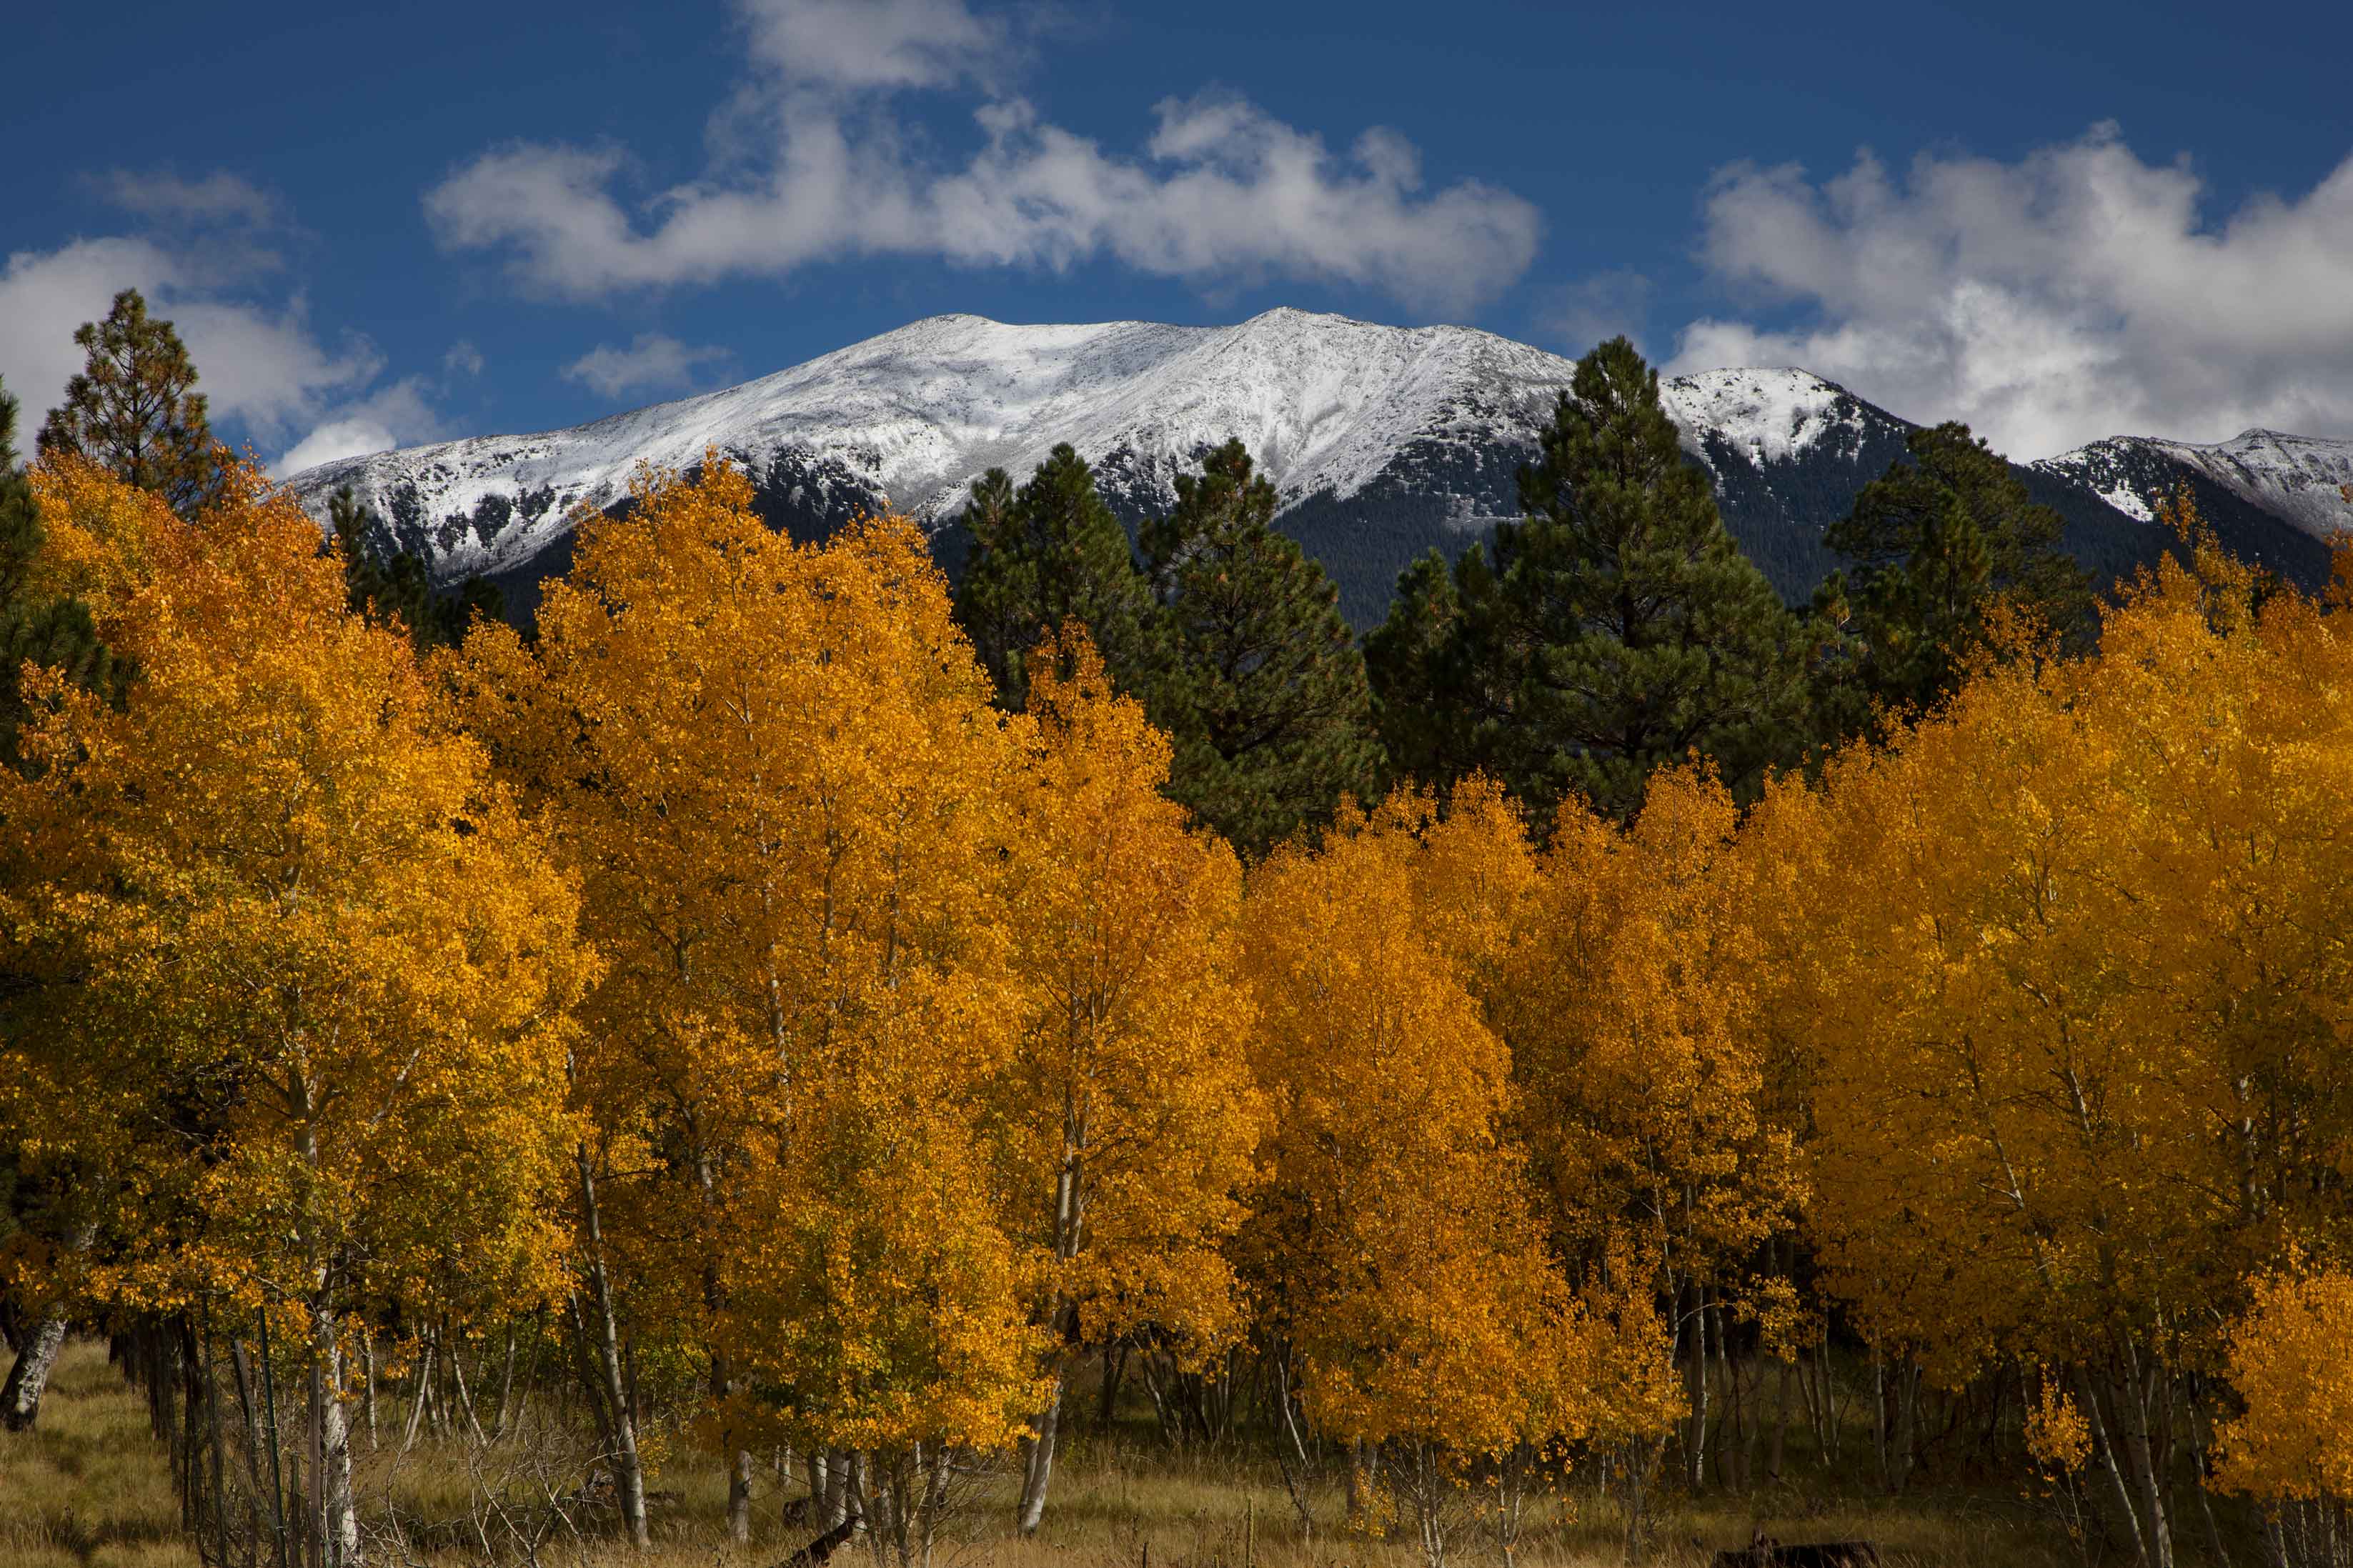 Aspen and Ponderosa pine trees in autumn in Hart Prairie on the lower slopes of the San Francisco Peaks, northern Arizona